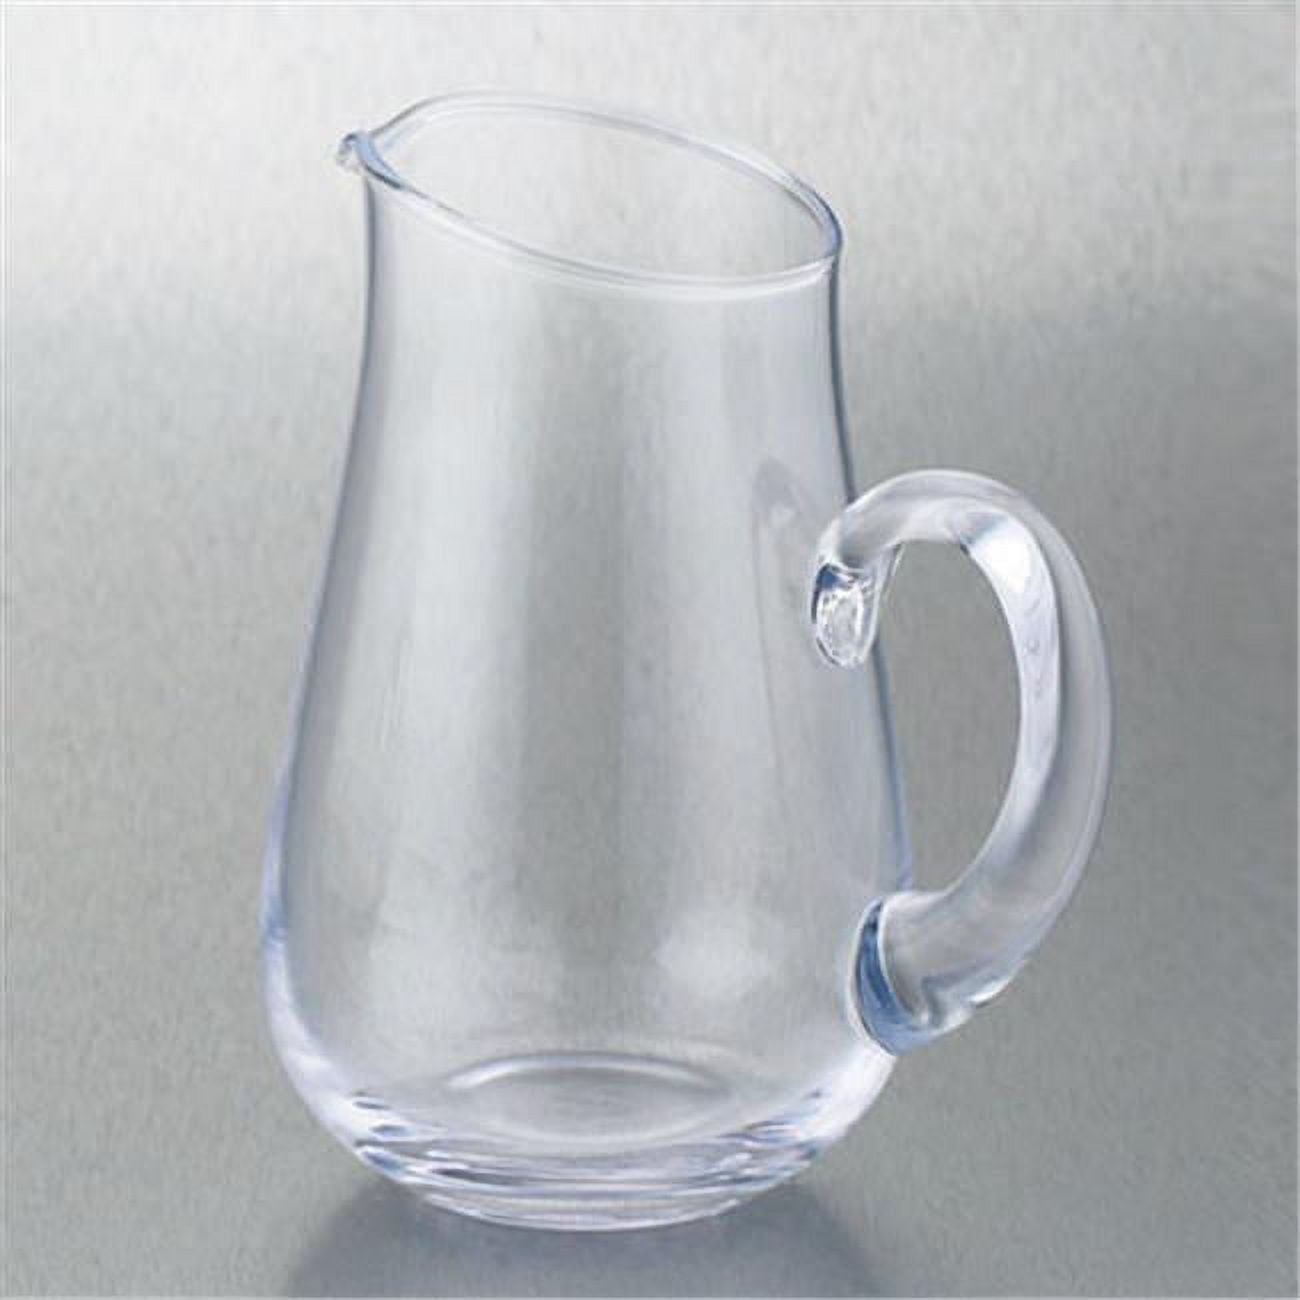 64281 7 X 4.5 In. Glass Pitcher, Clear